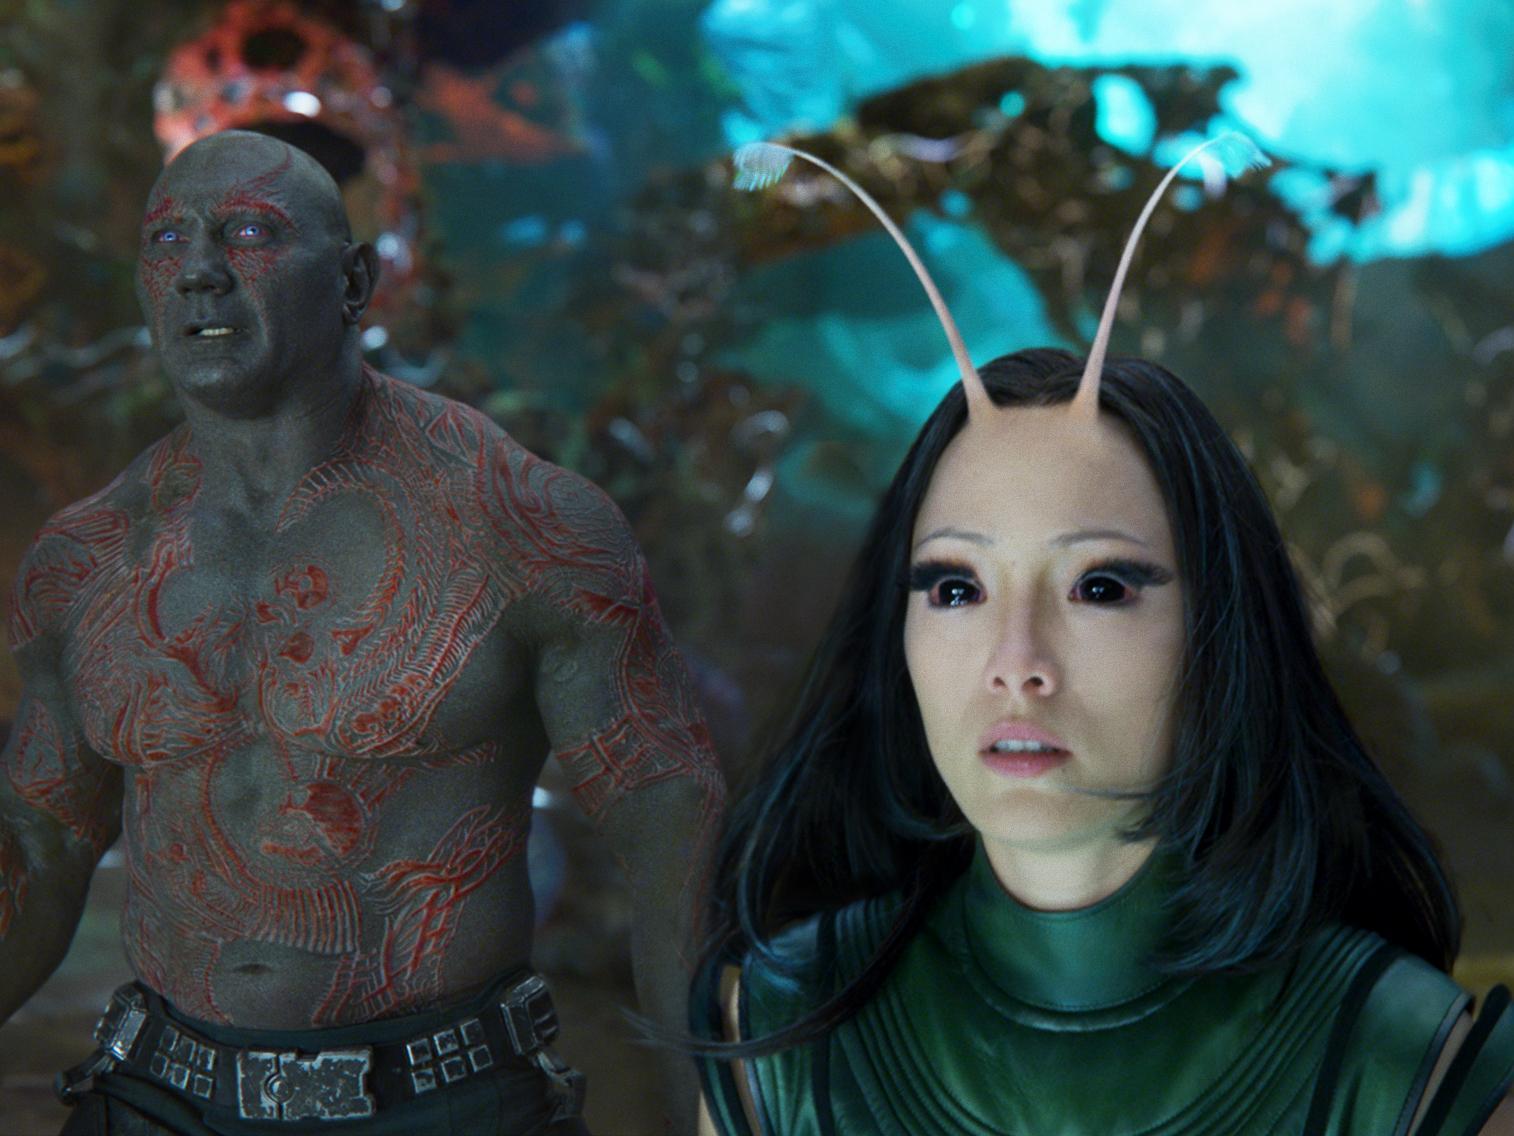 Dave Bautista and Pom Klementieff in ‘Guardians of the Galaxy Vol 2’ (Marvel/Disney)